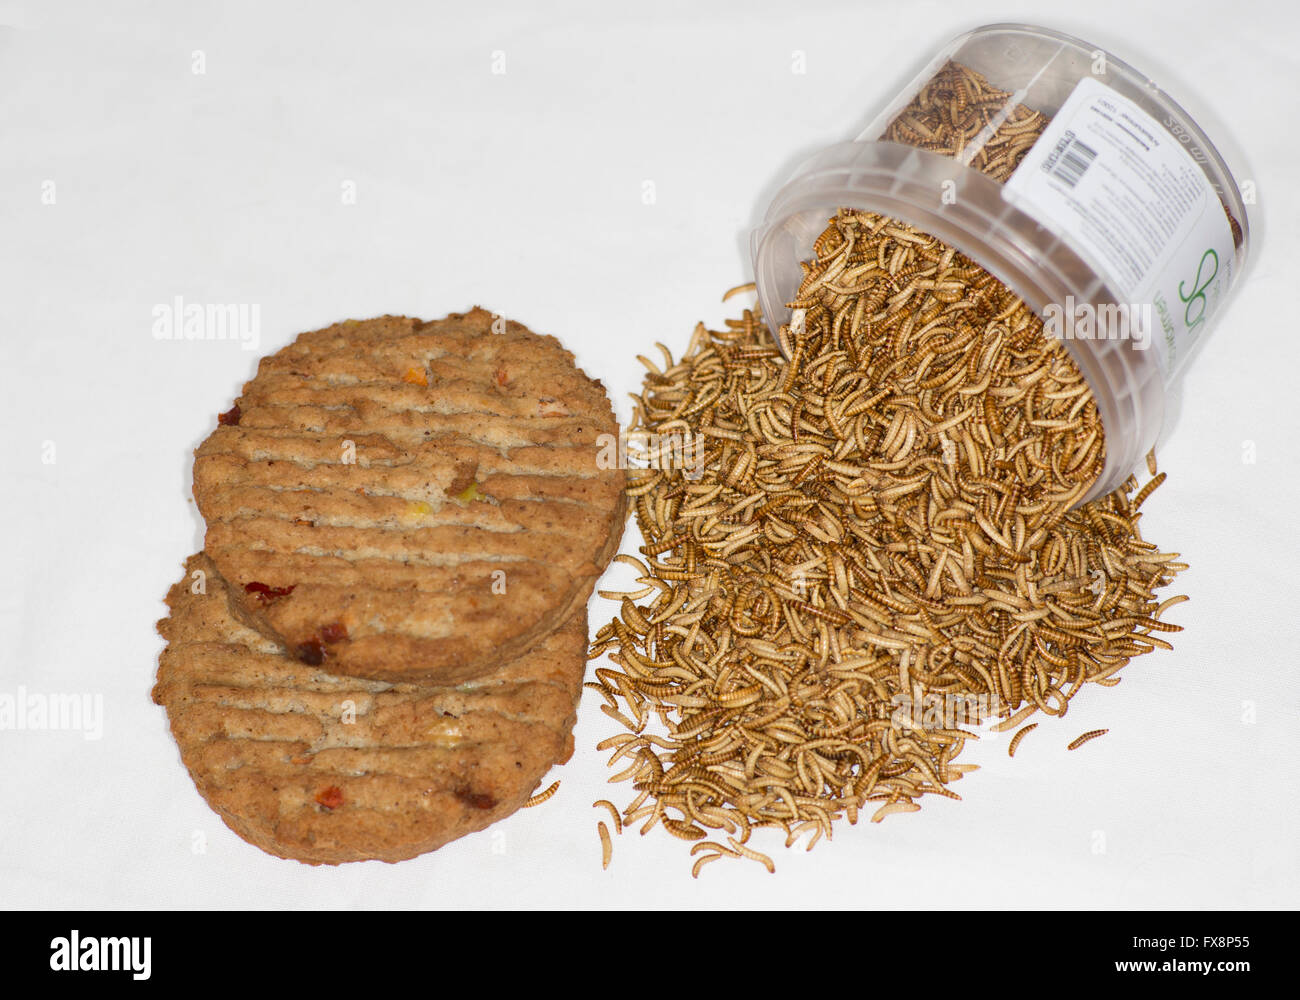 large scale production of edible insects (mealworms) in Holland Stock Photo